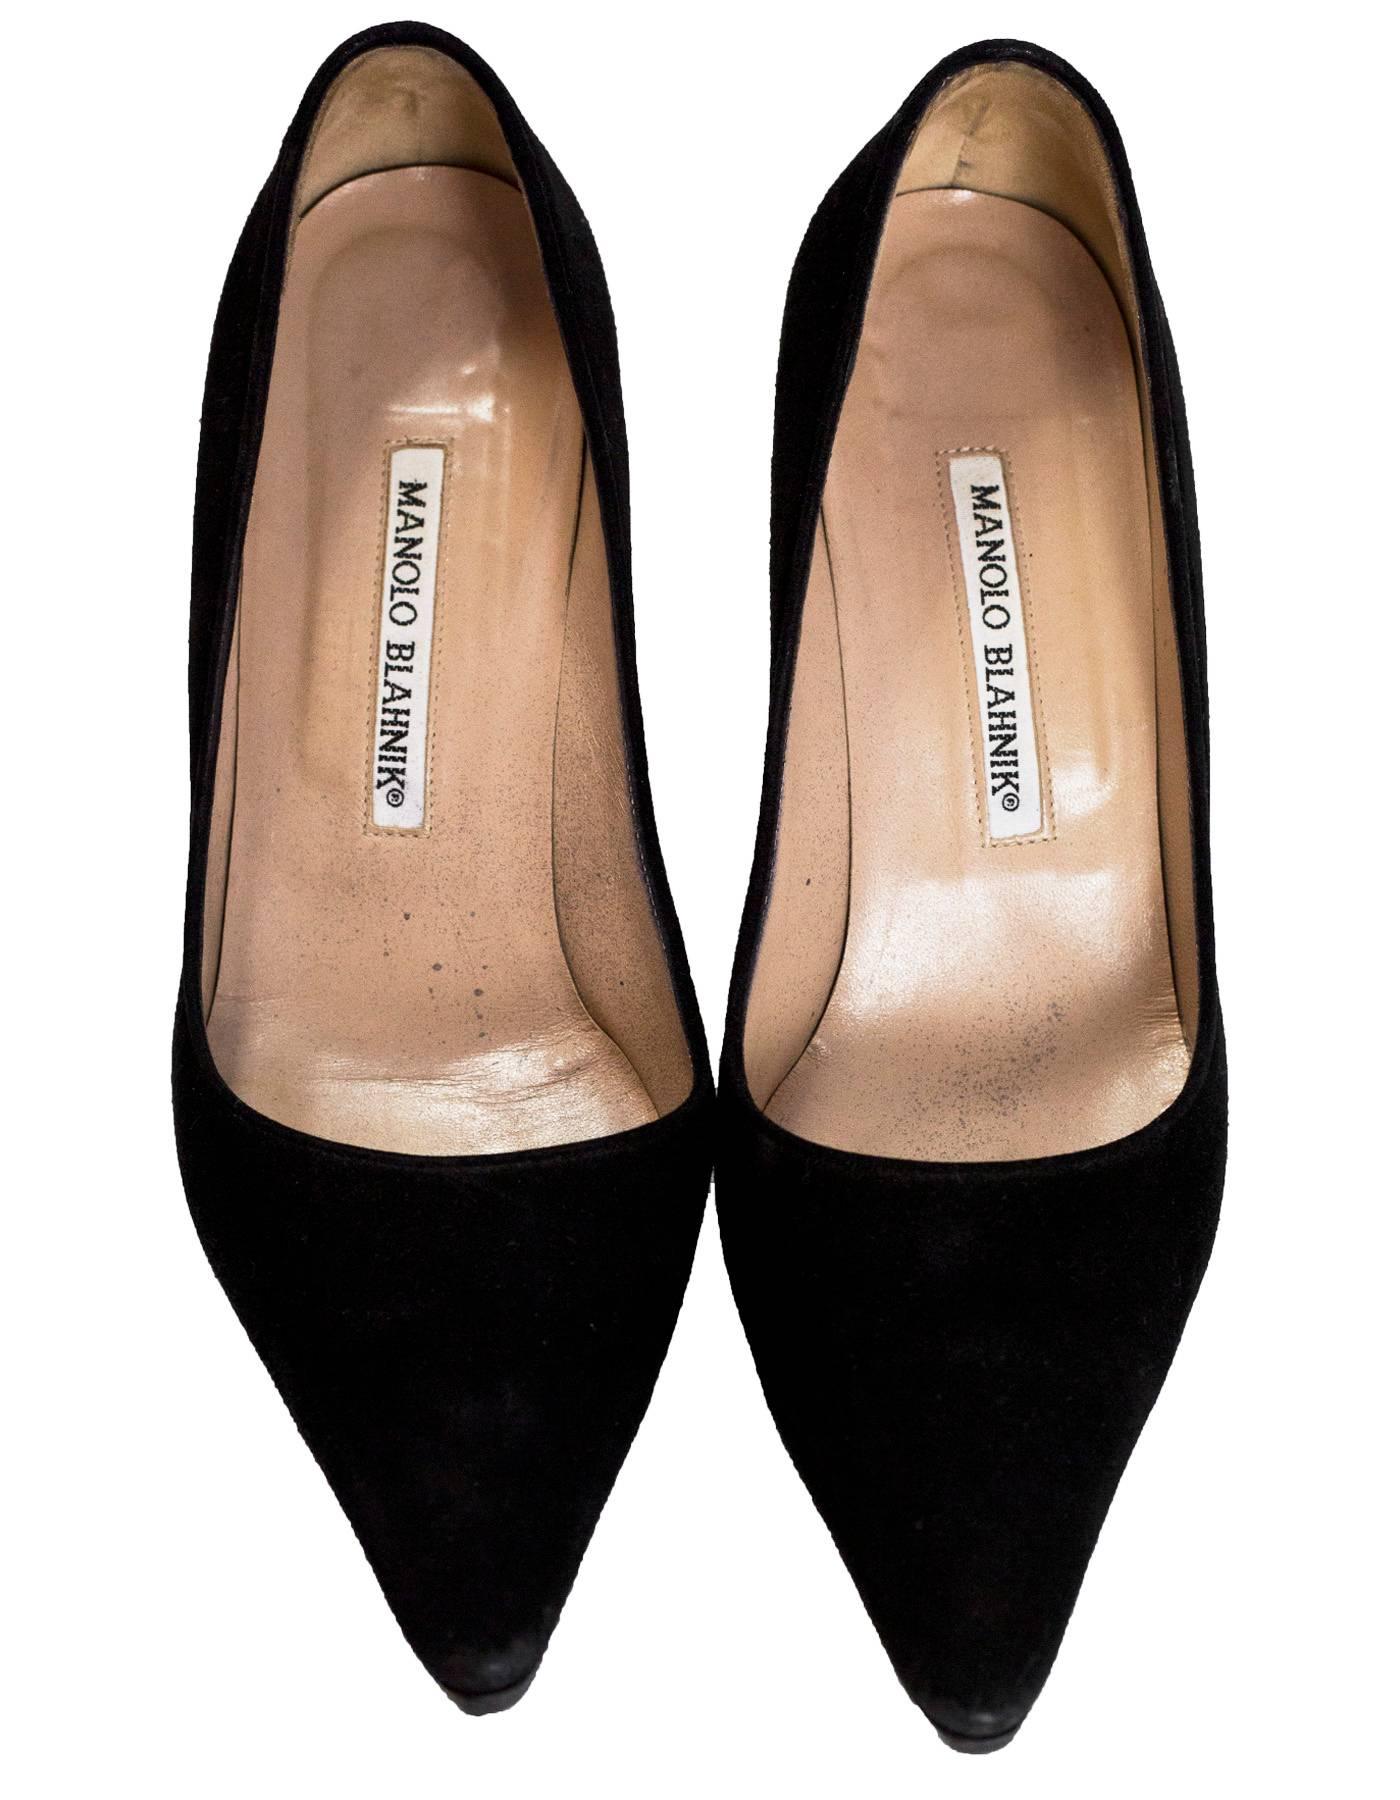 Manolo Blahnik Black Suede Pumps Sz 37.5

Made In: Italy
Color: Black
Materials: Suede
Closure/Opening: Slide on
Sole Stamp: Manolo Blahnik Made in Italy 37.5
Overall Condition: Excellent pre-owned condition with the exception of light wear at